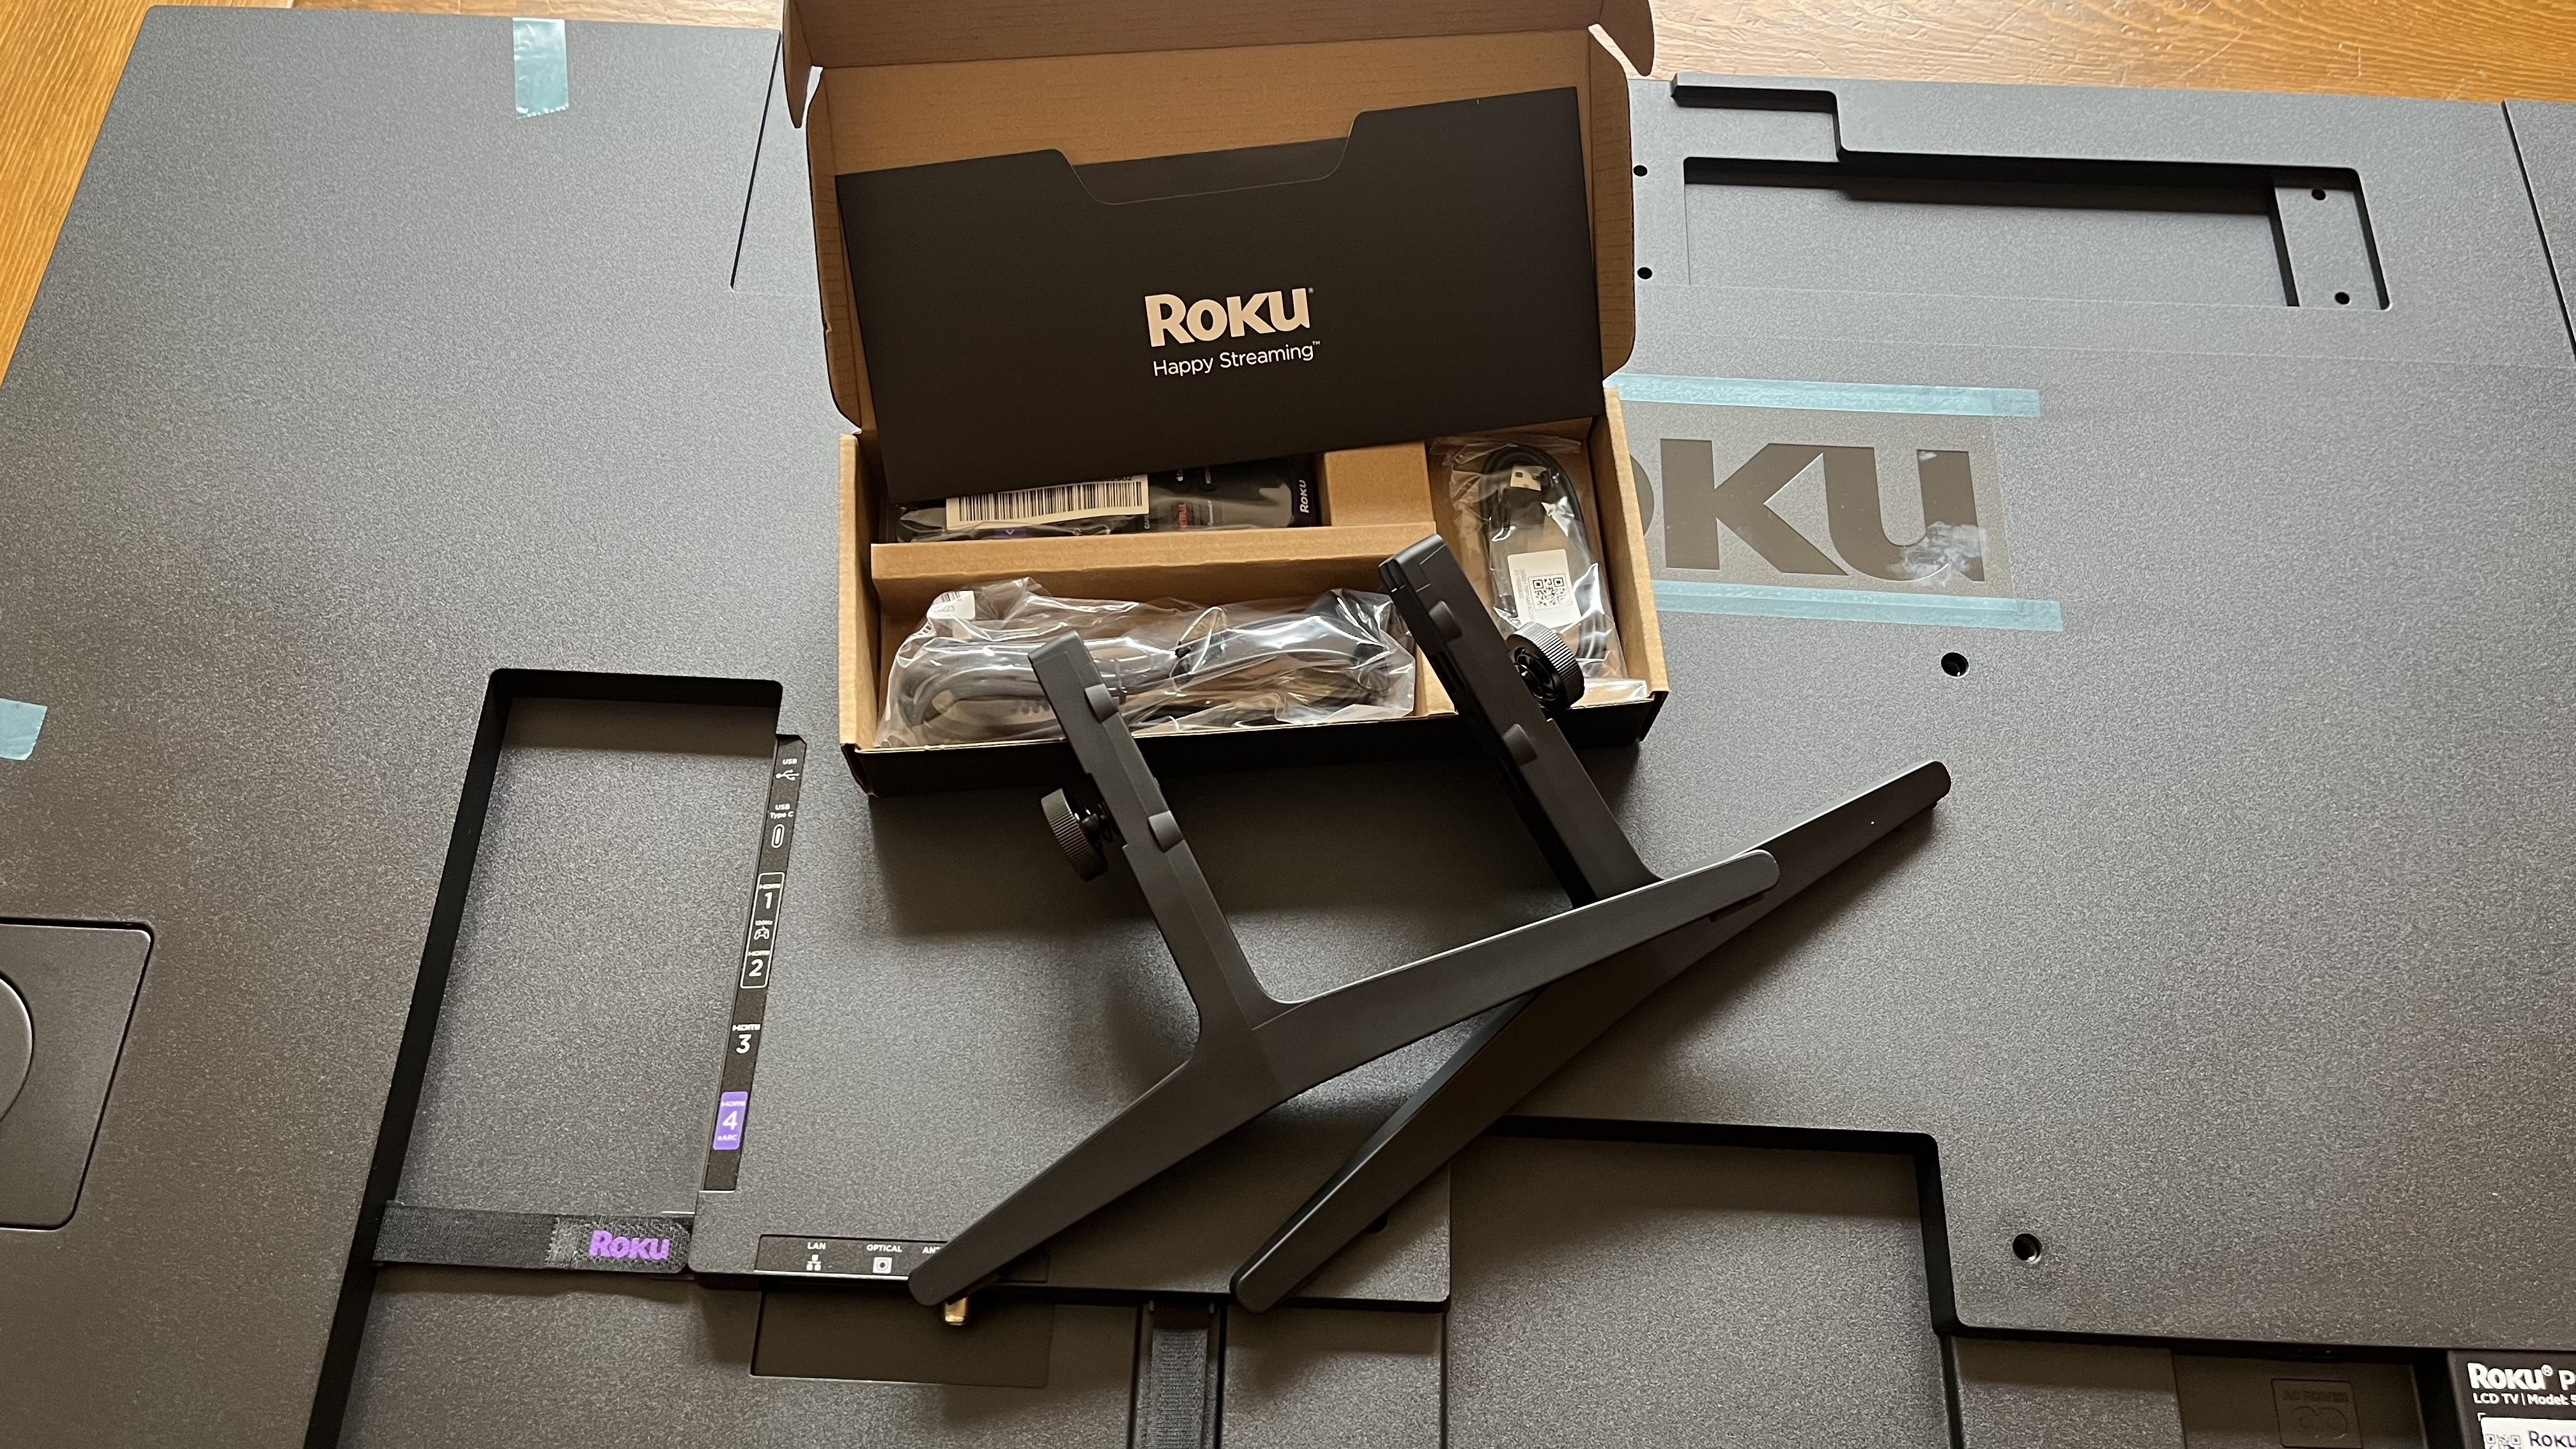 Roku Pro series unboxed